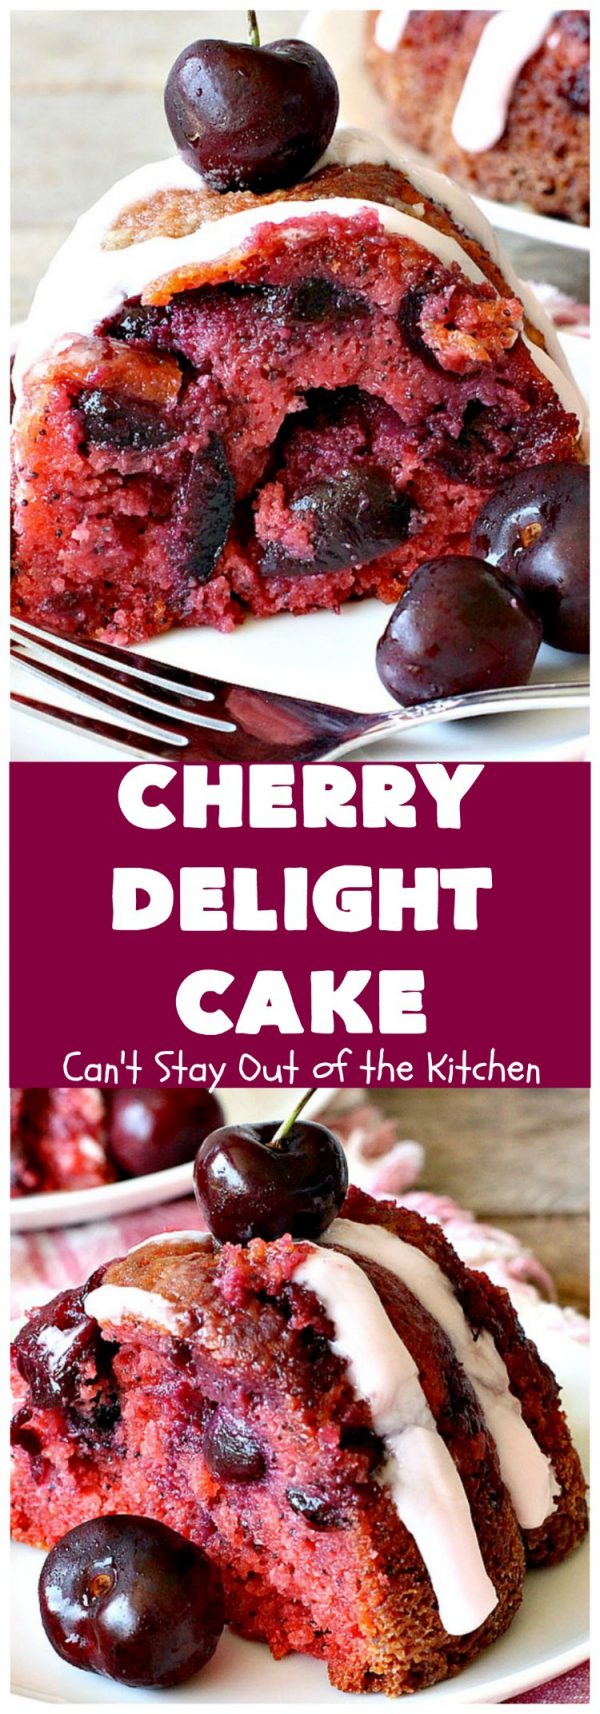 Cherry Delight Cake – Can't Stay Out of the Kitchen